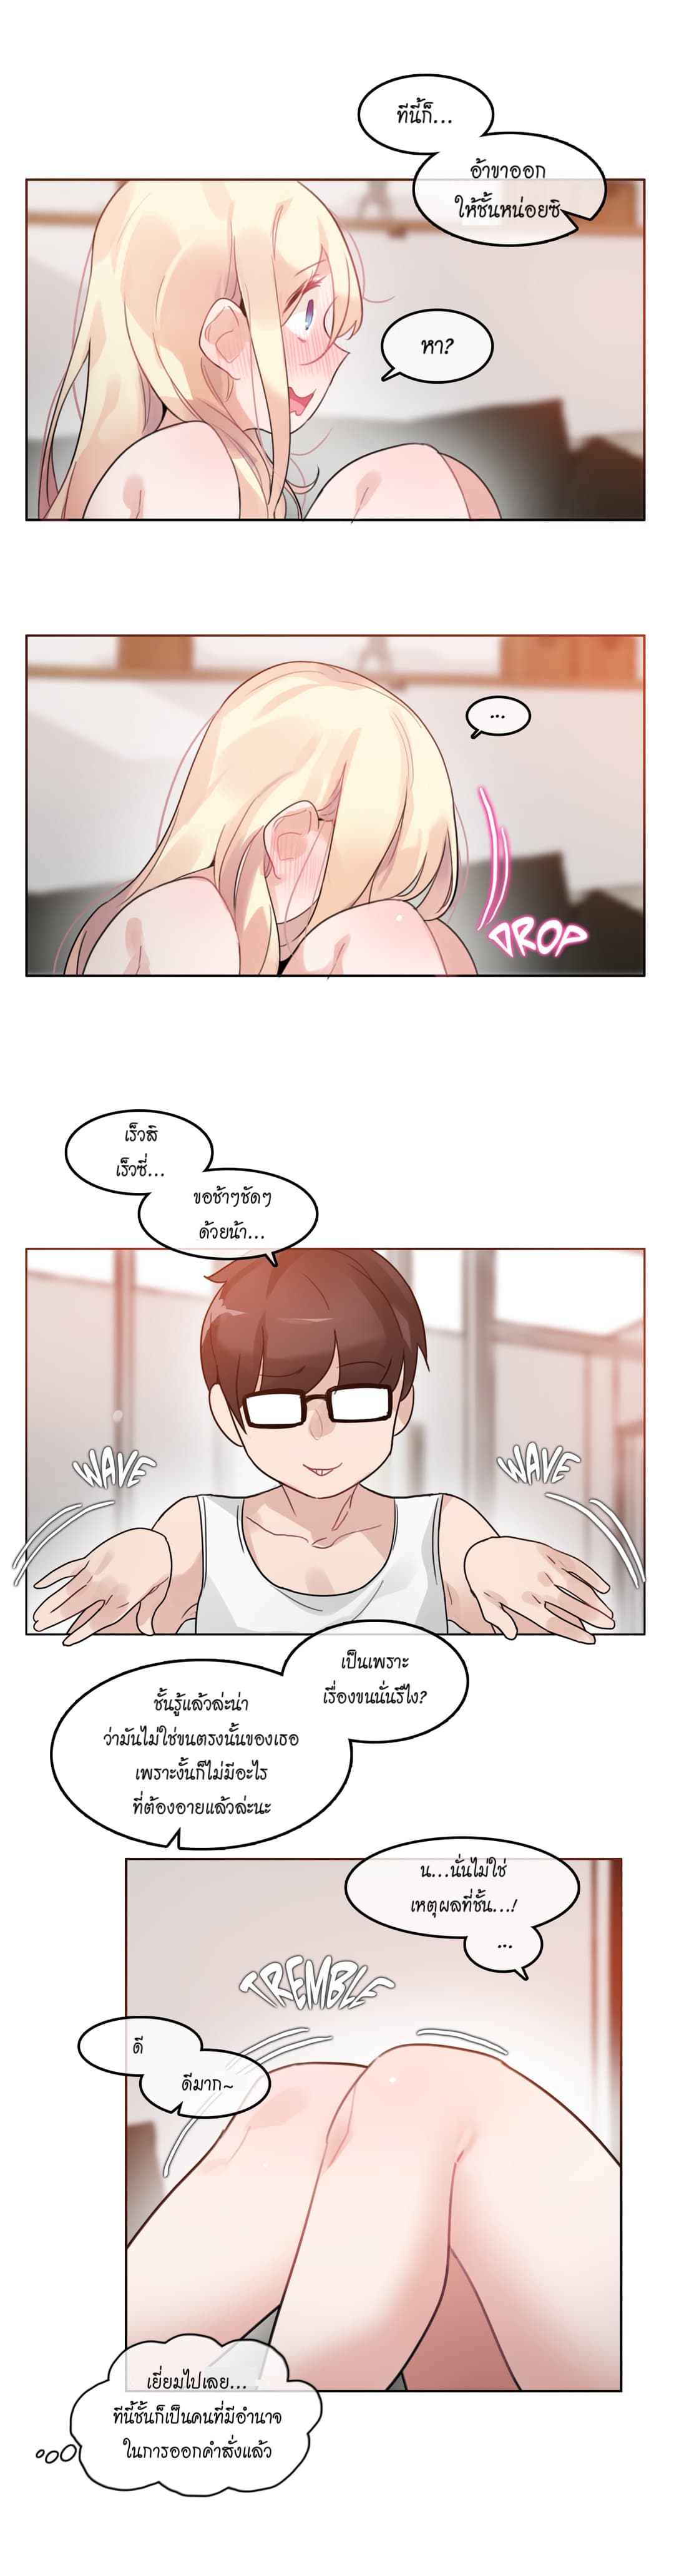 A Pervert’s Daily Life 34 (18)